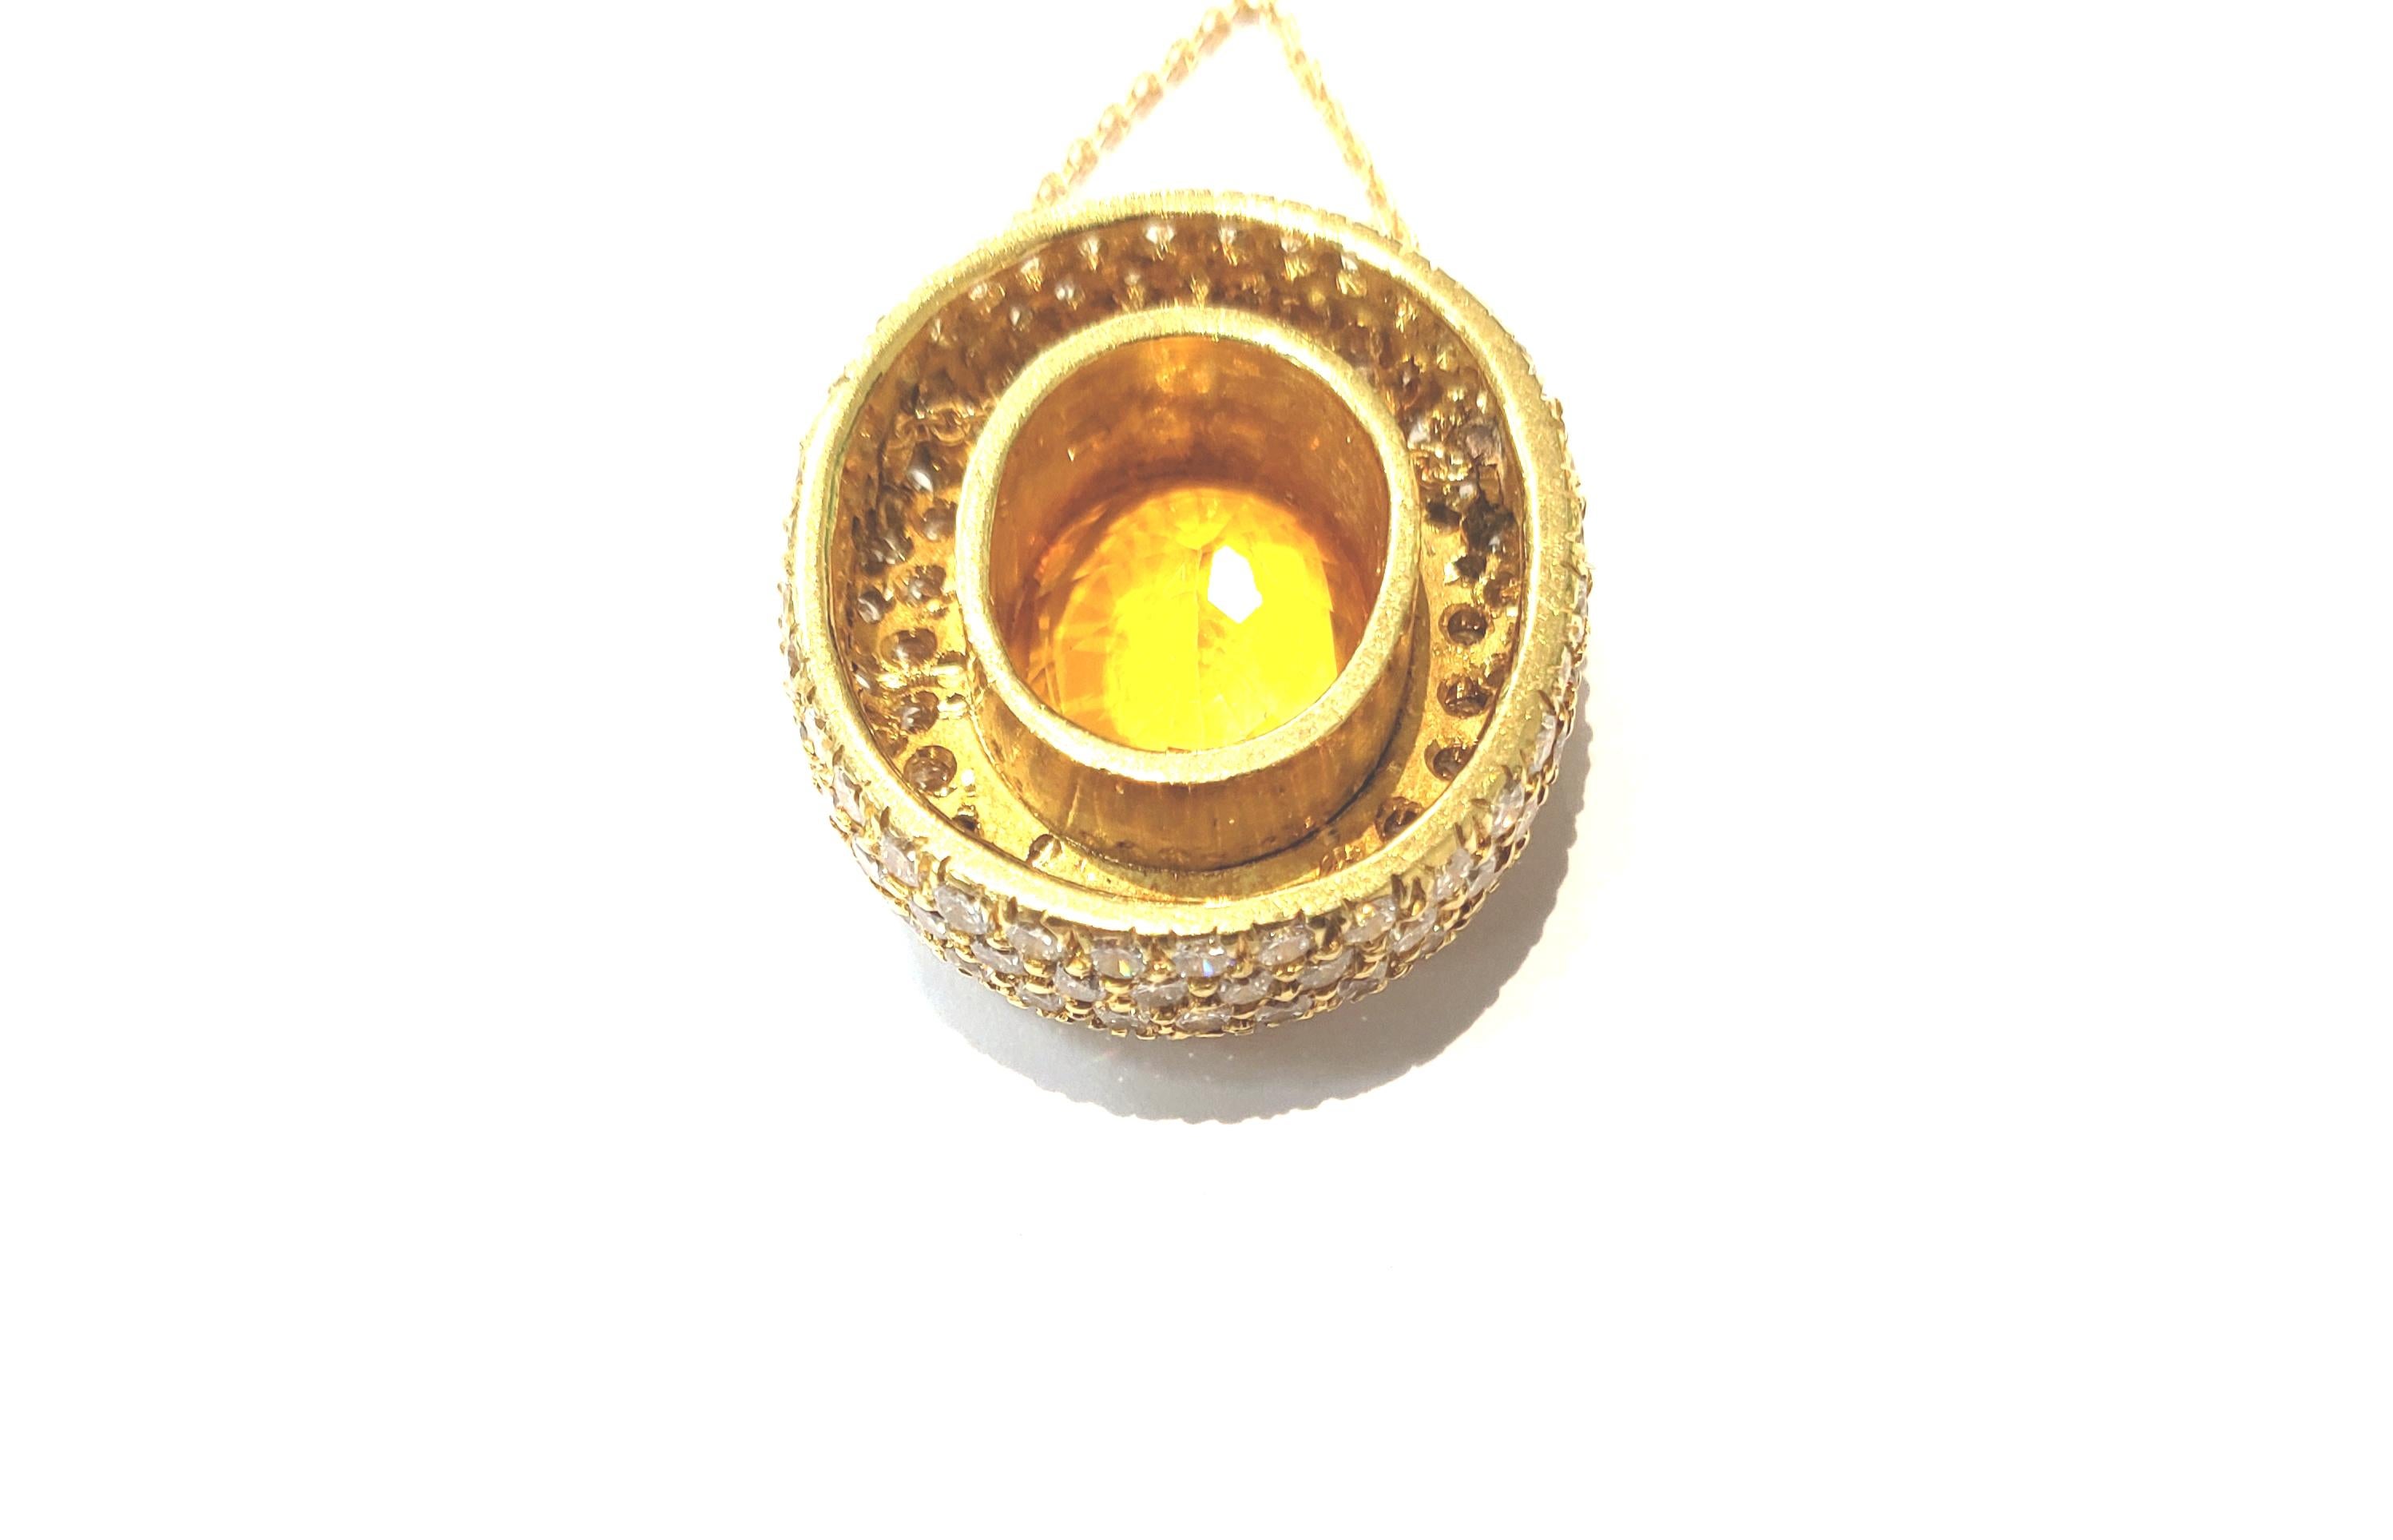 Handmade 18 Karat Yellow Gold and Diamond Pendant with a Center Yellow Sapphire For Sale 3